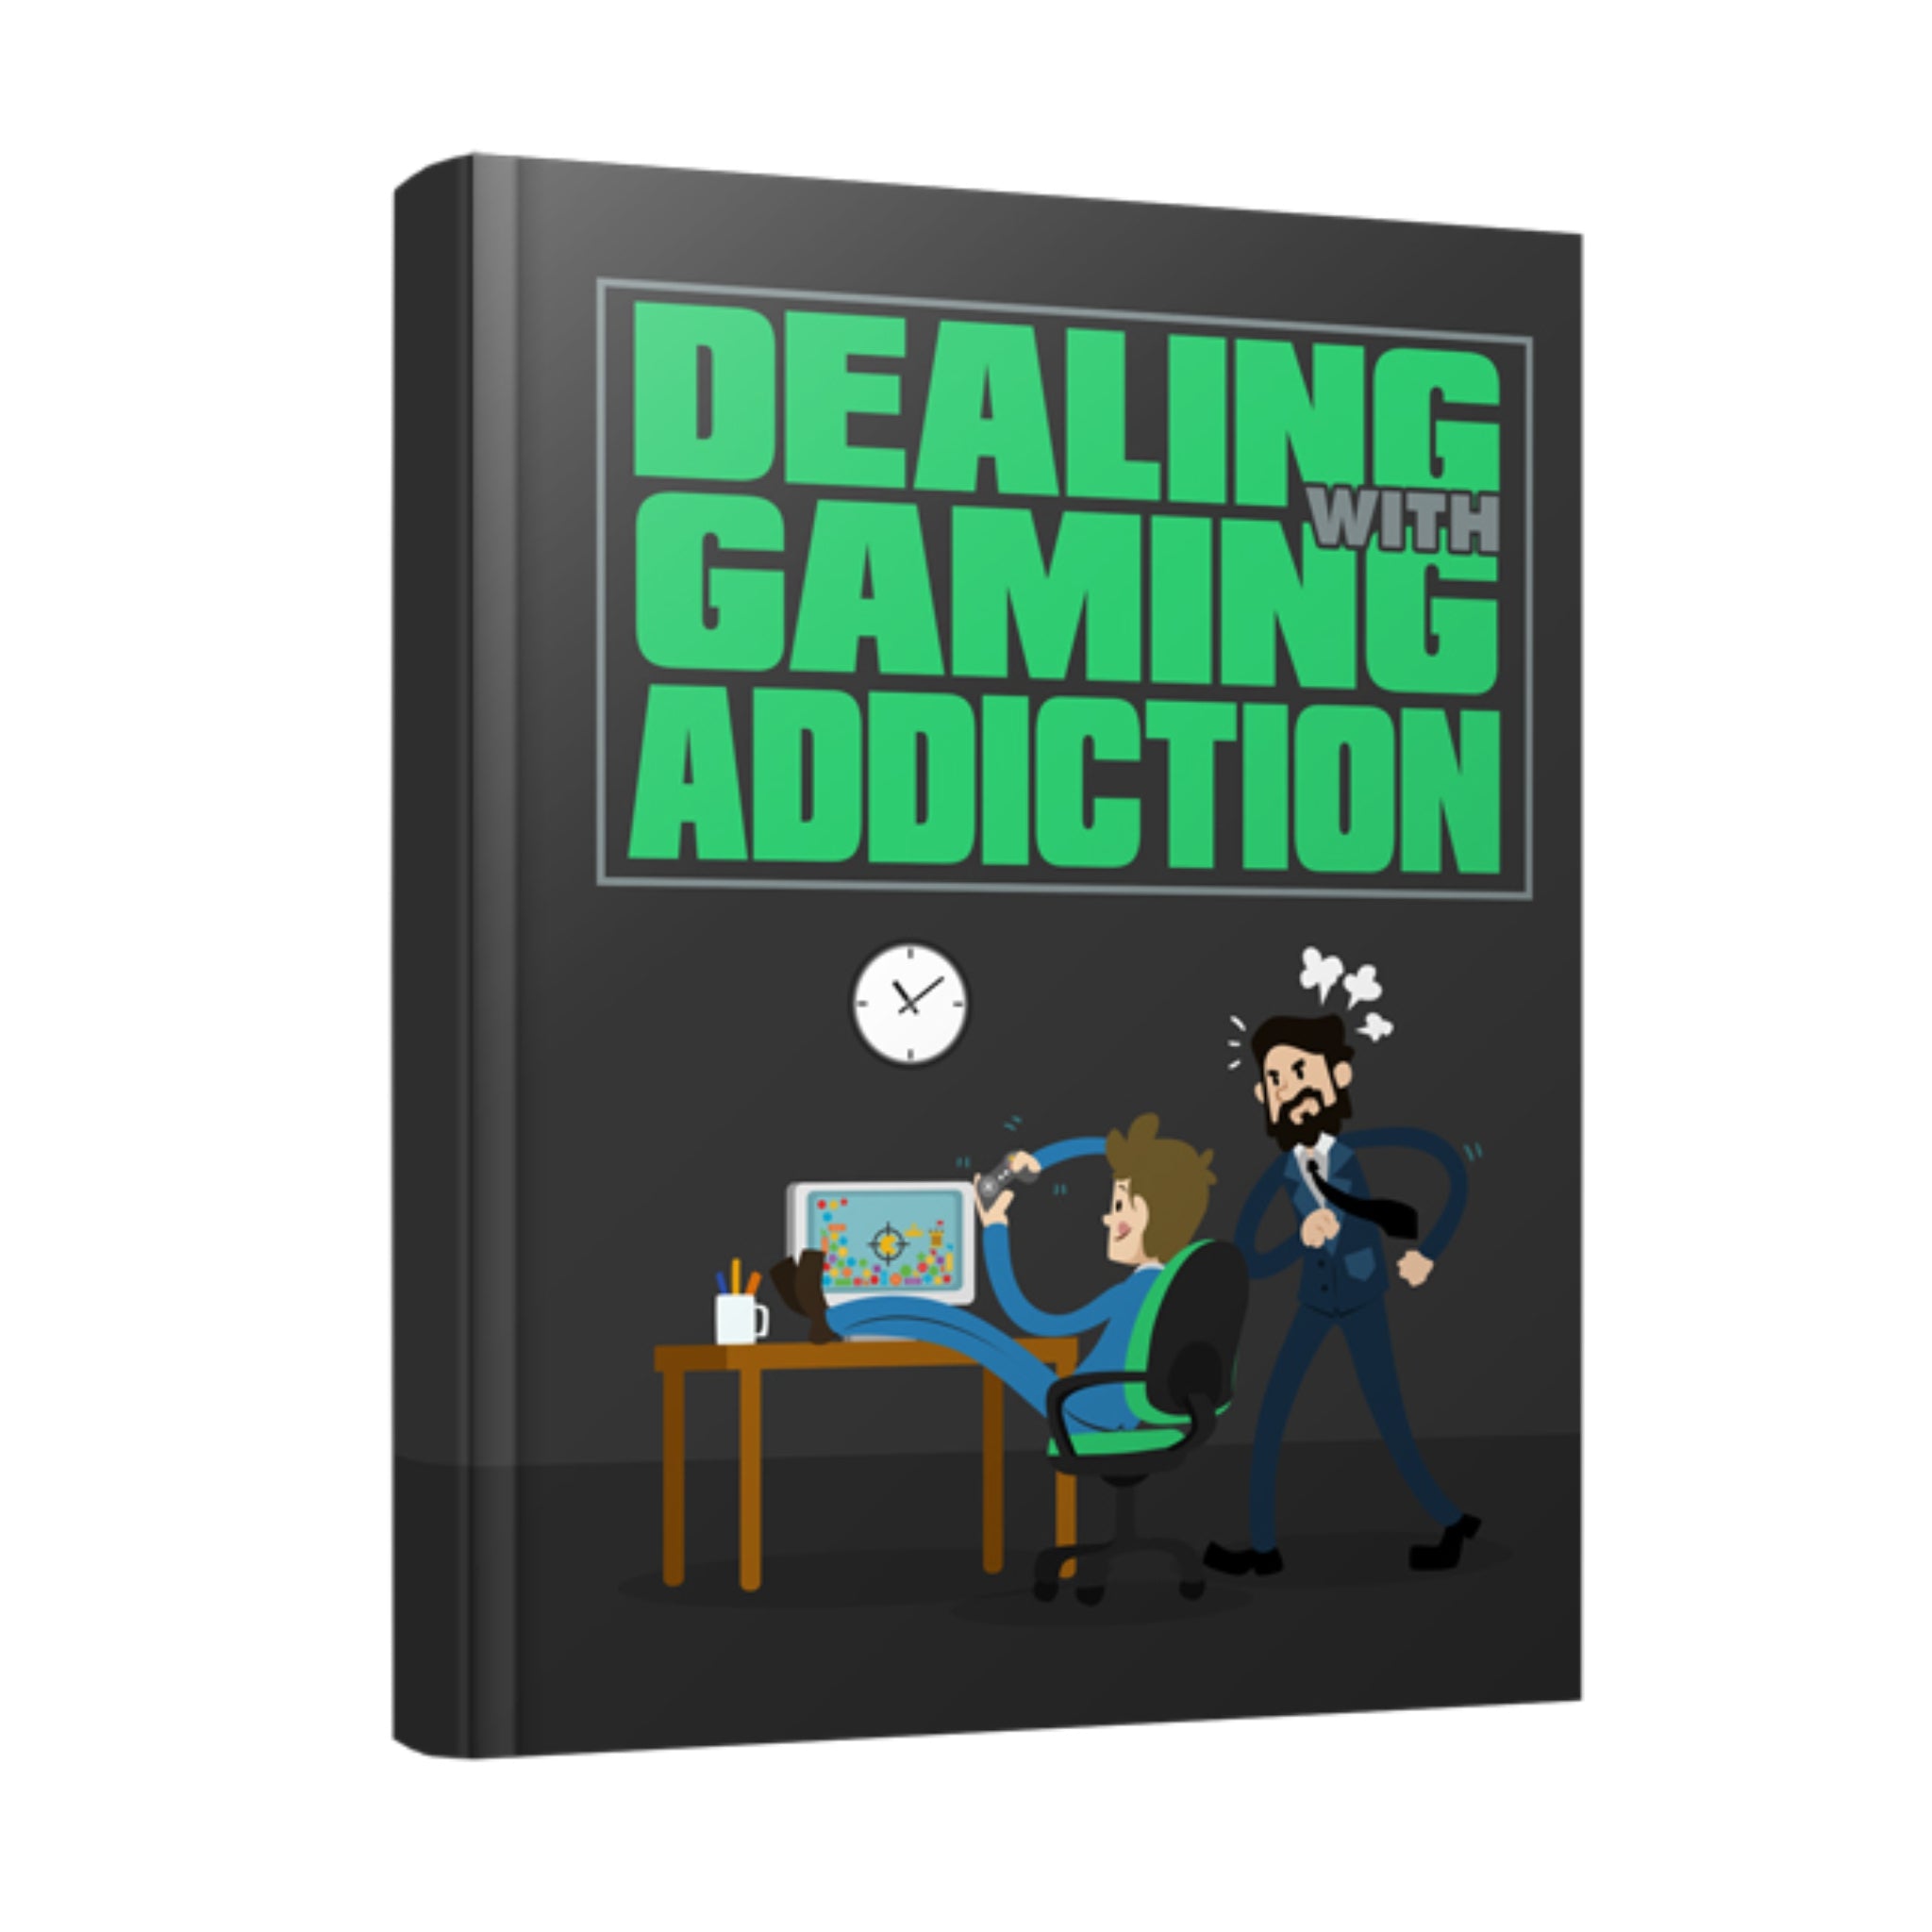 Dealing with Gaming Addiction Ebook